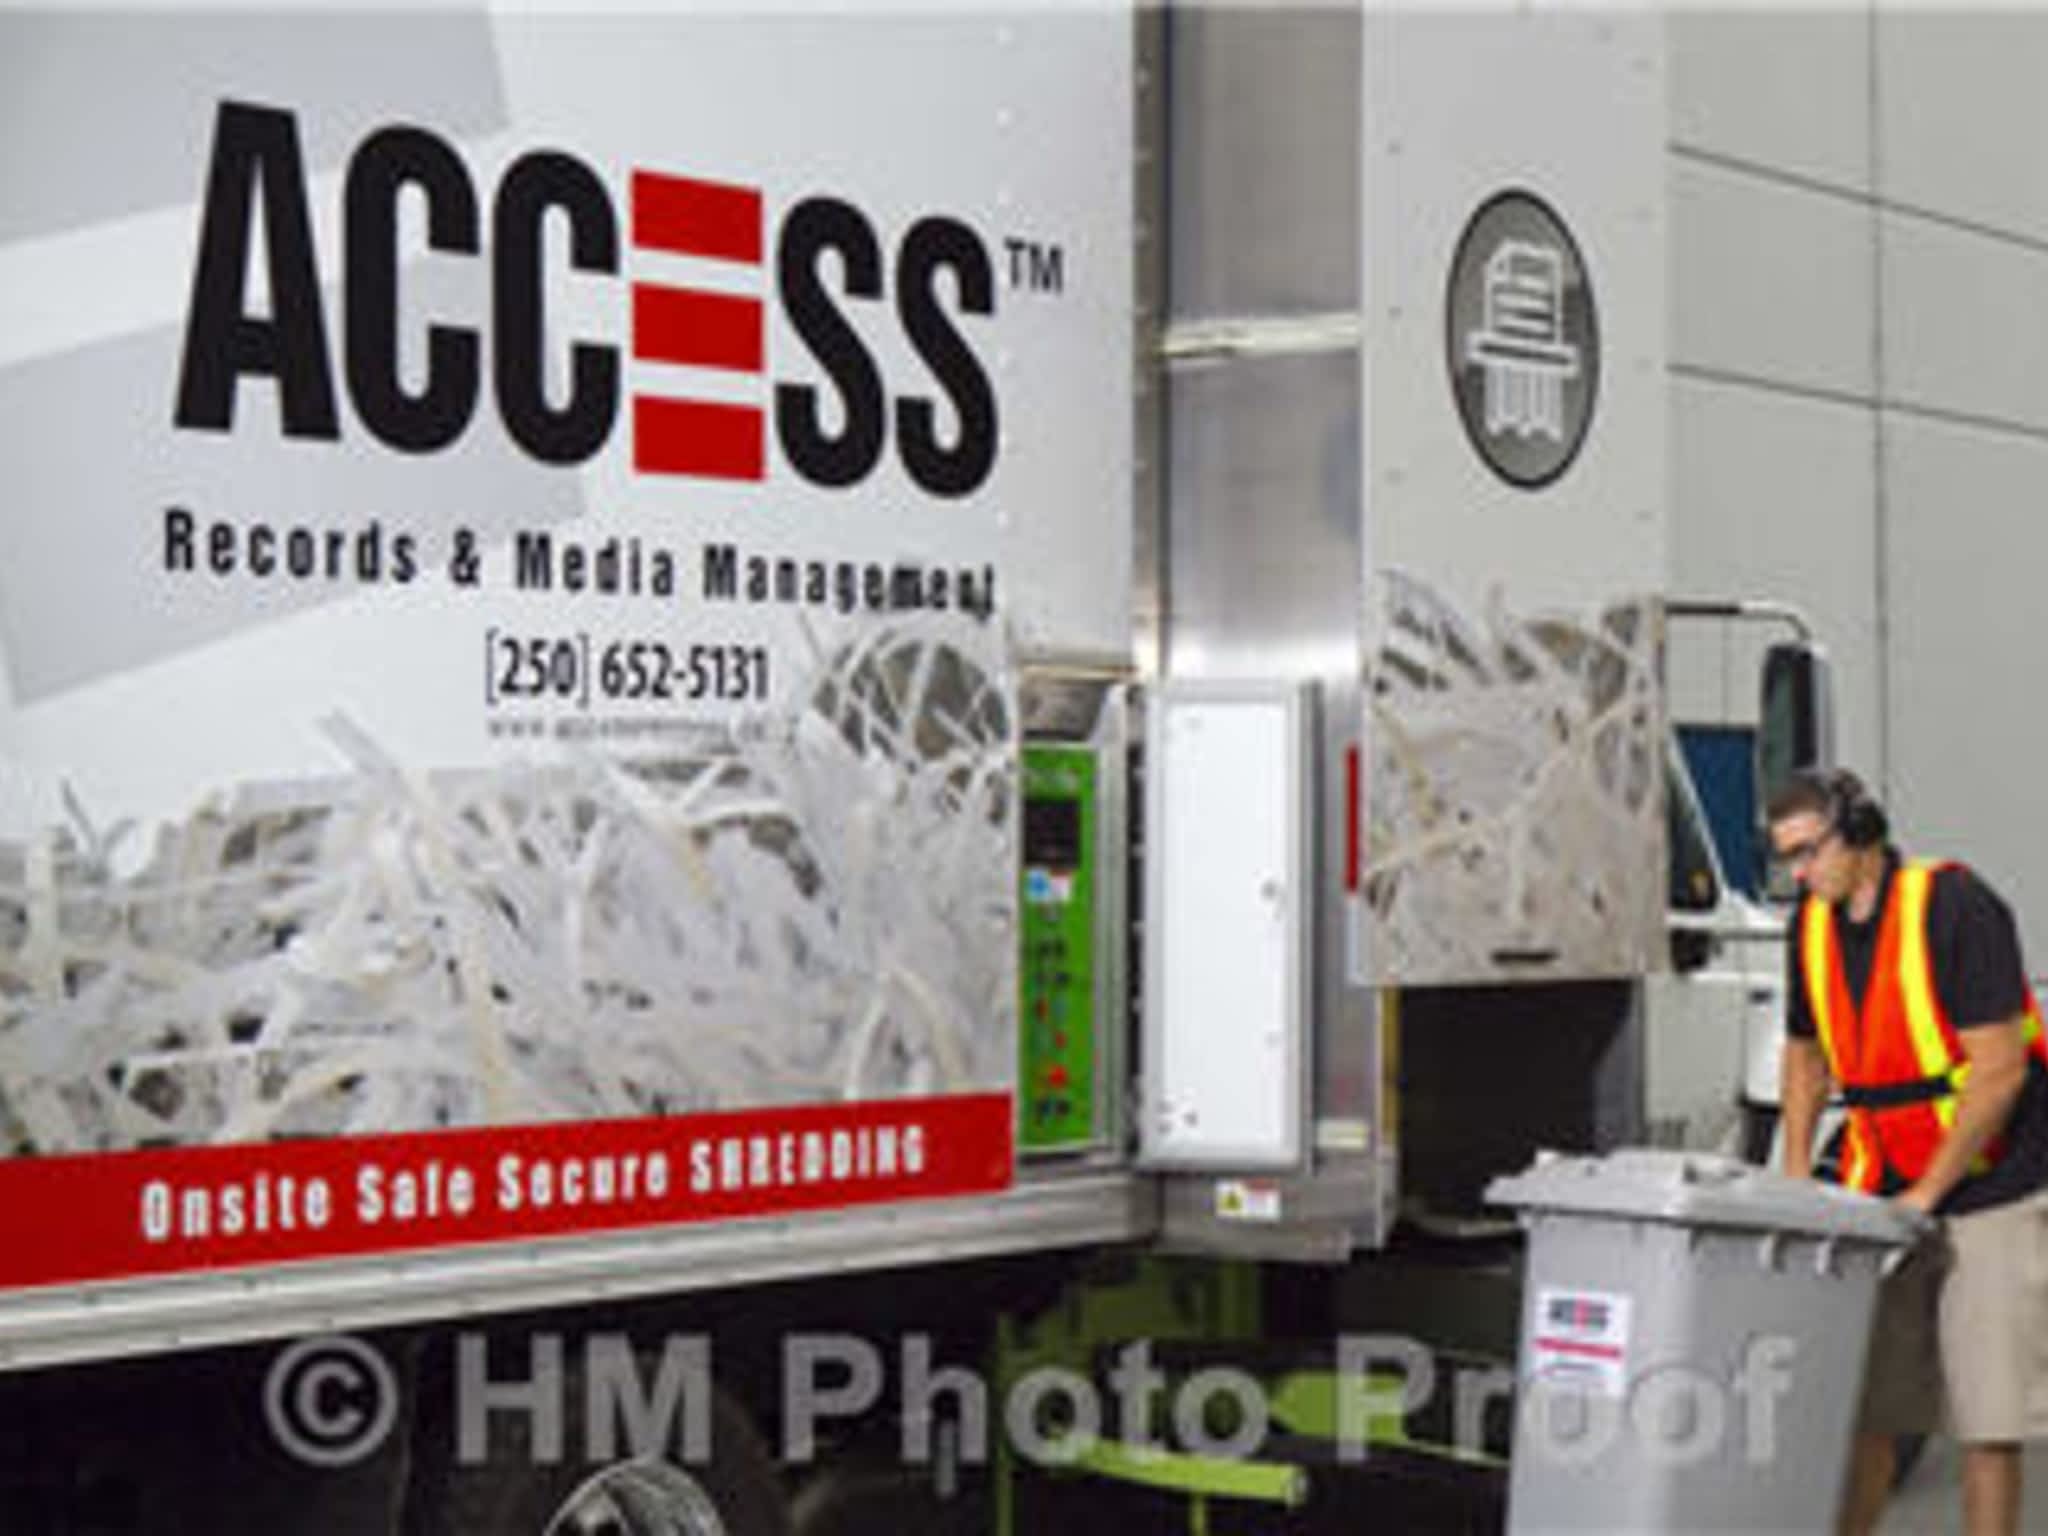 photo Access Records & Media Management